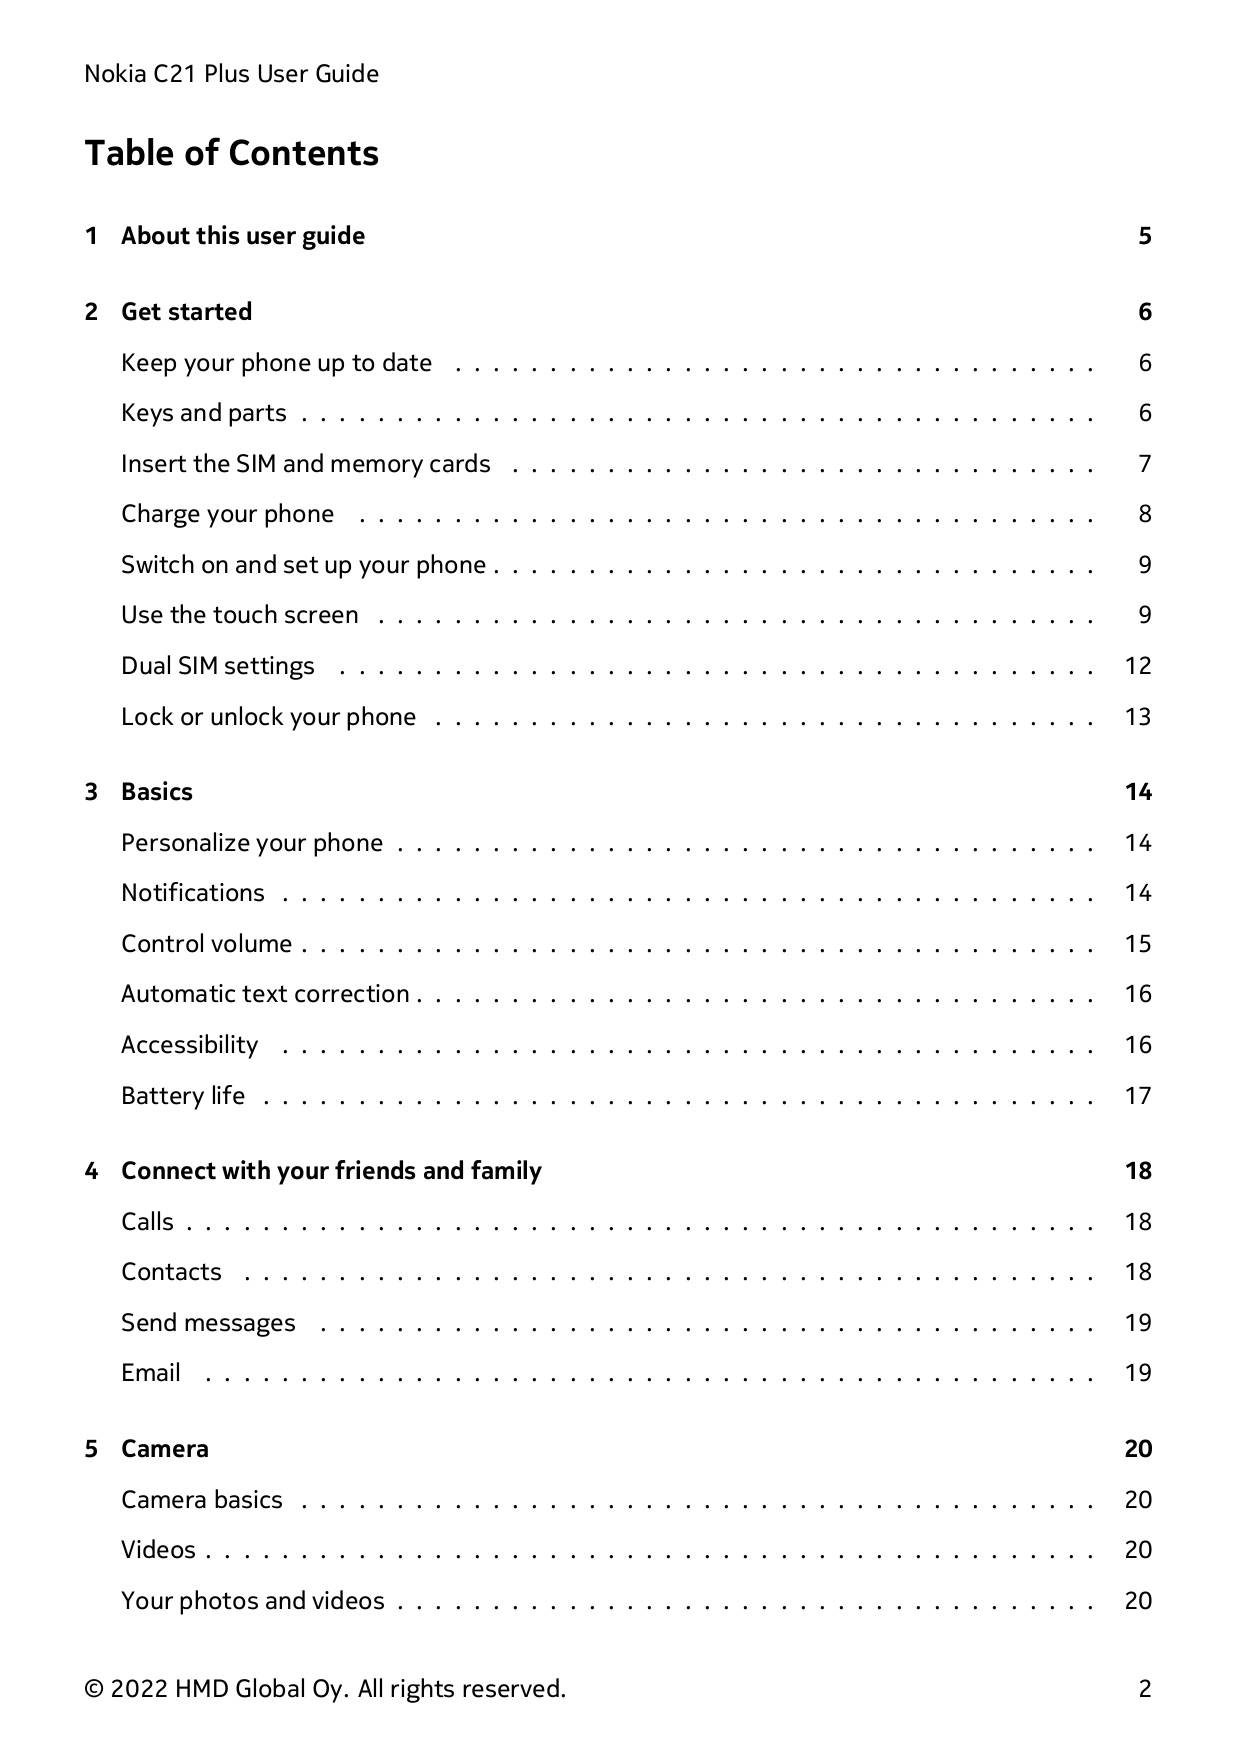 Nokia C21 Plus User GuideTable of Contents1 About this user guide52 Get started6Keep your phone up to date . . . . . . . . . . .